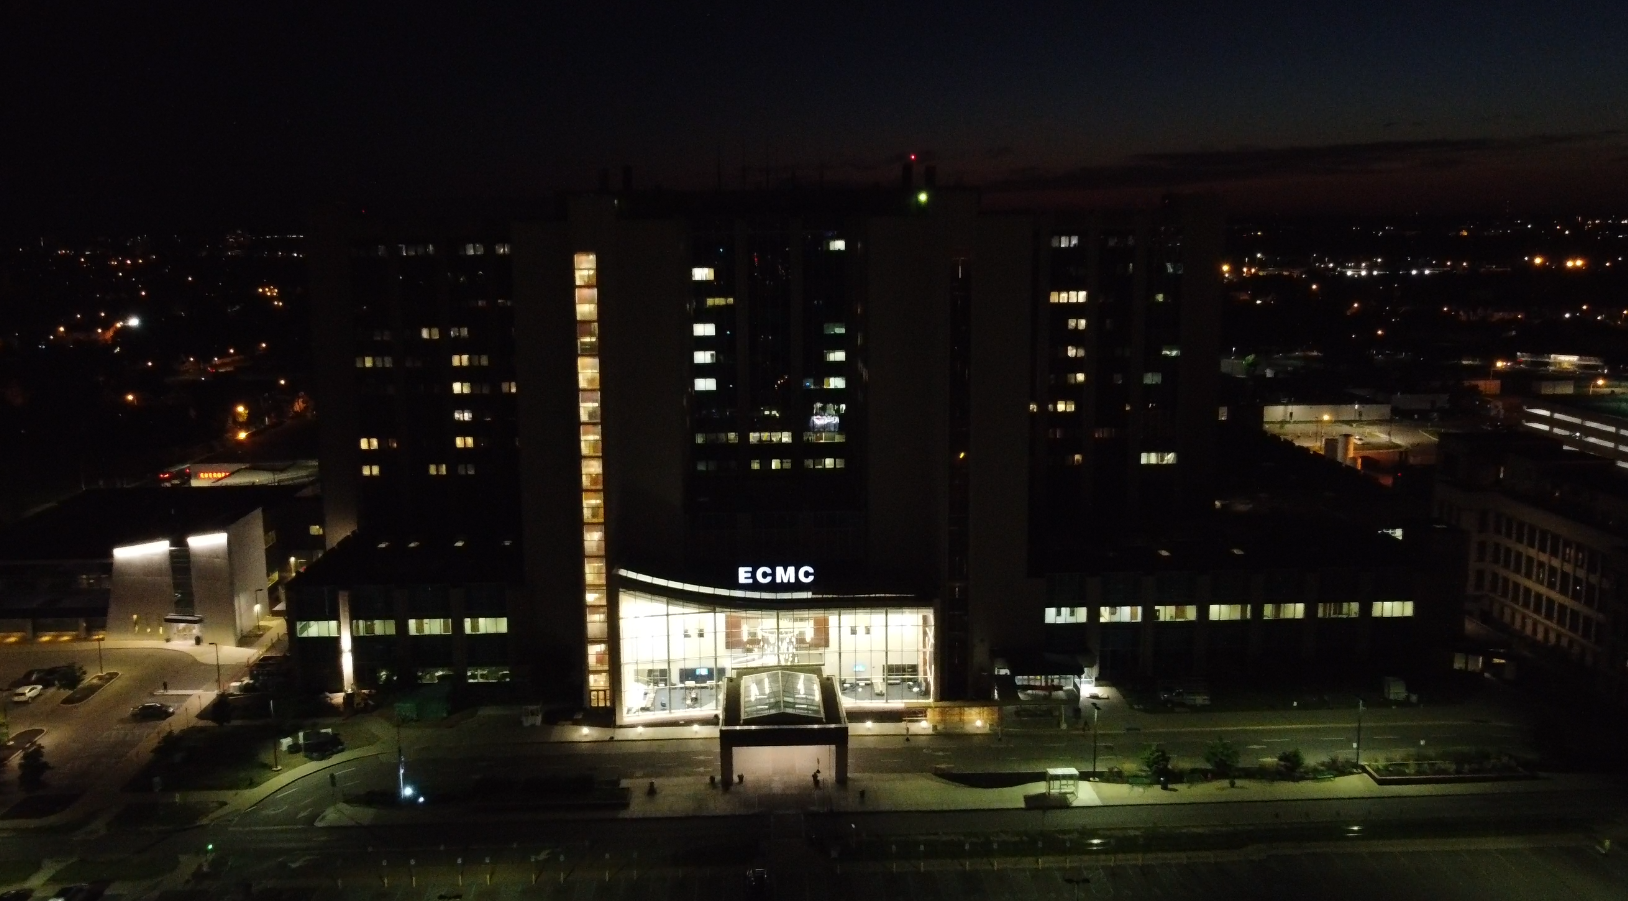 Erie County Medical Center at night